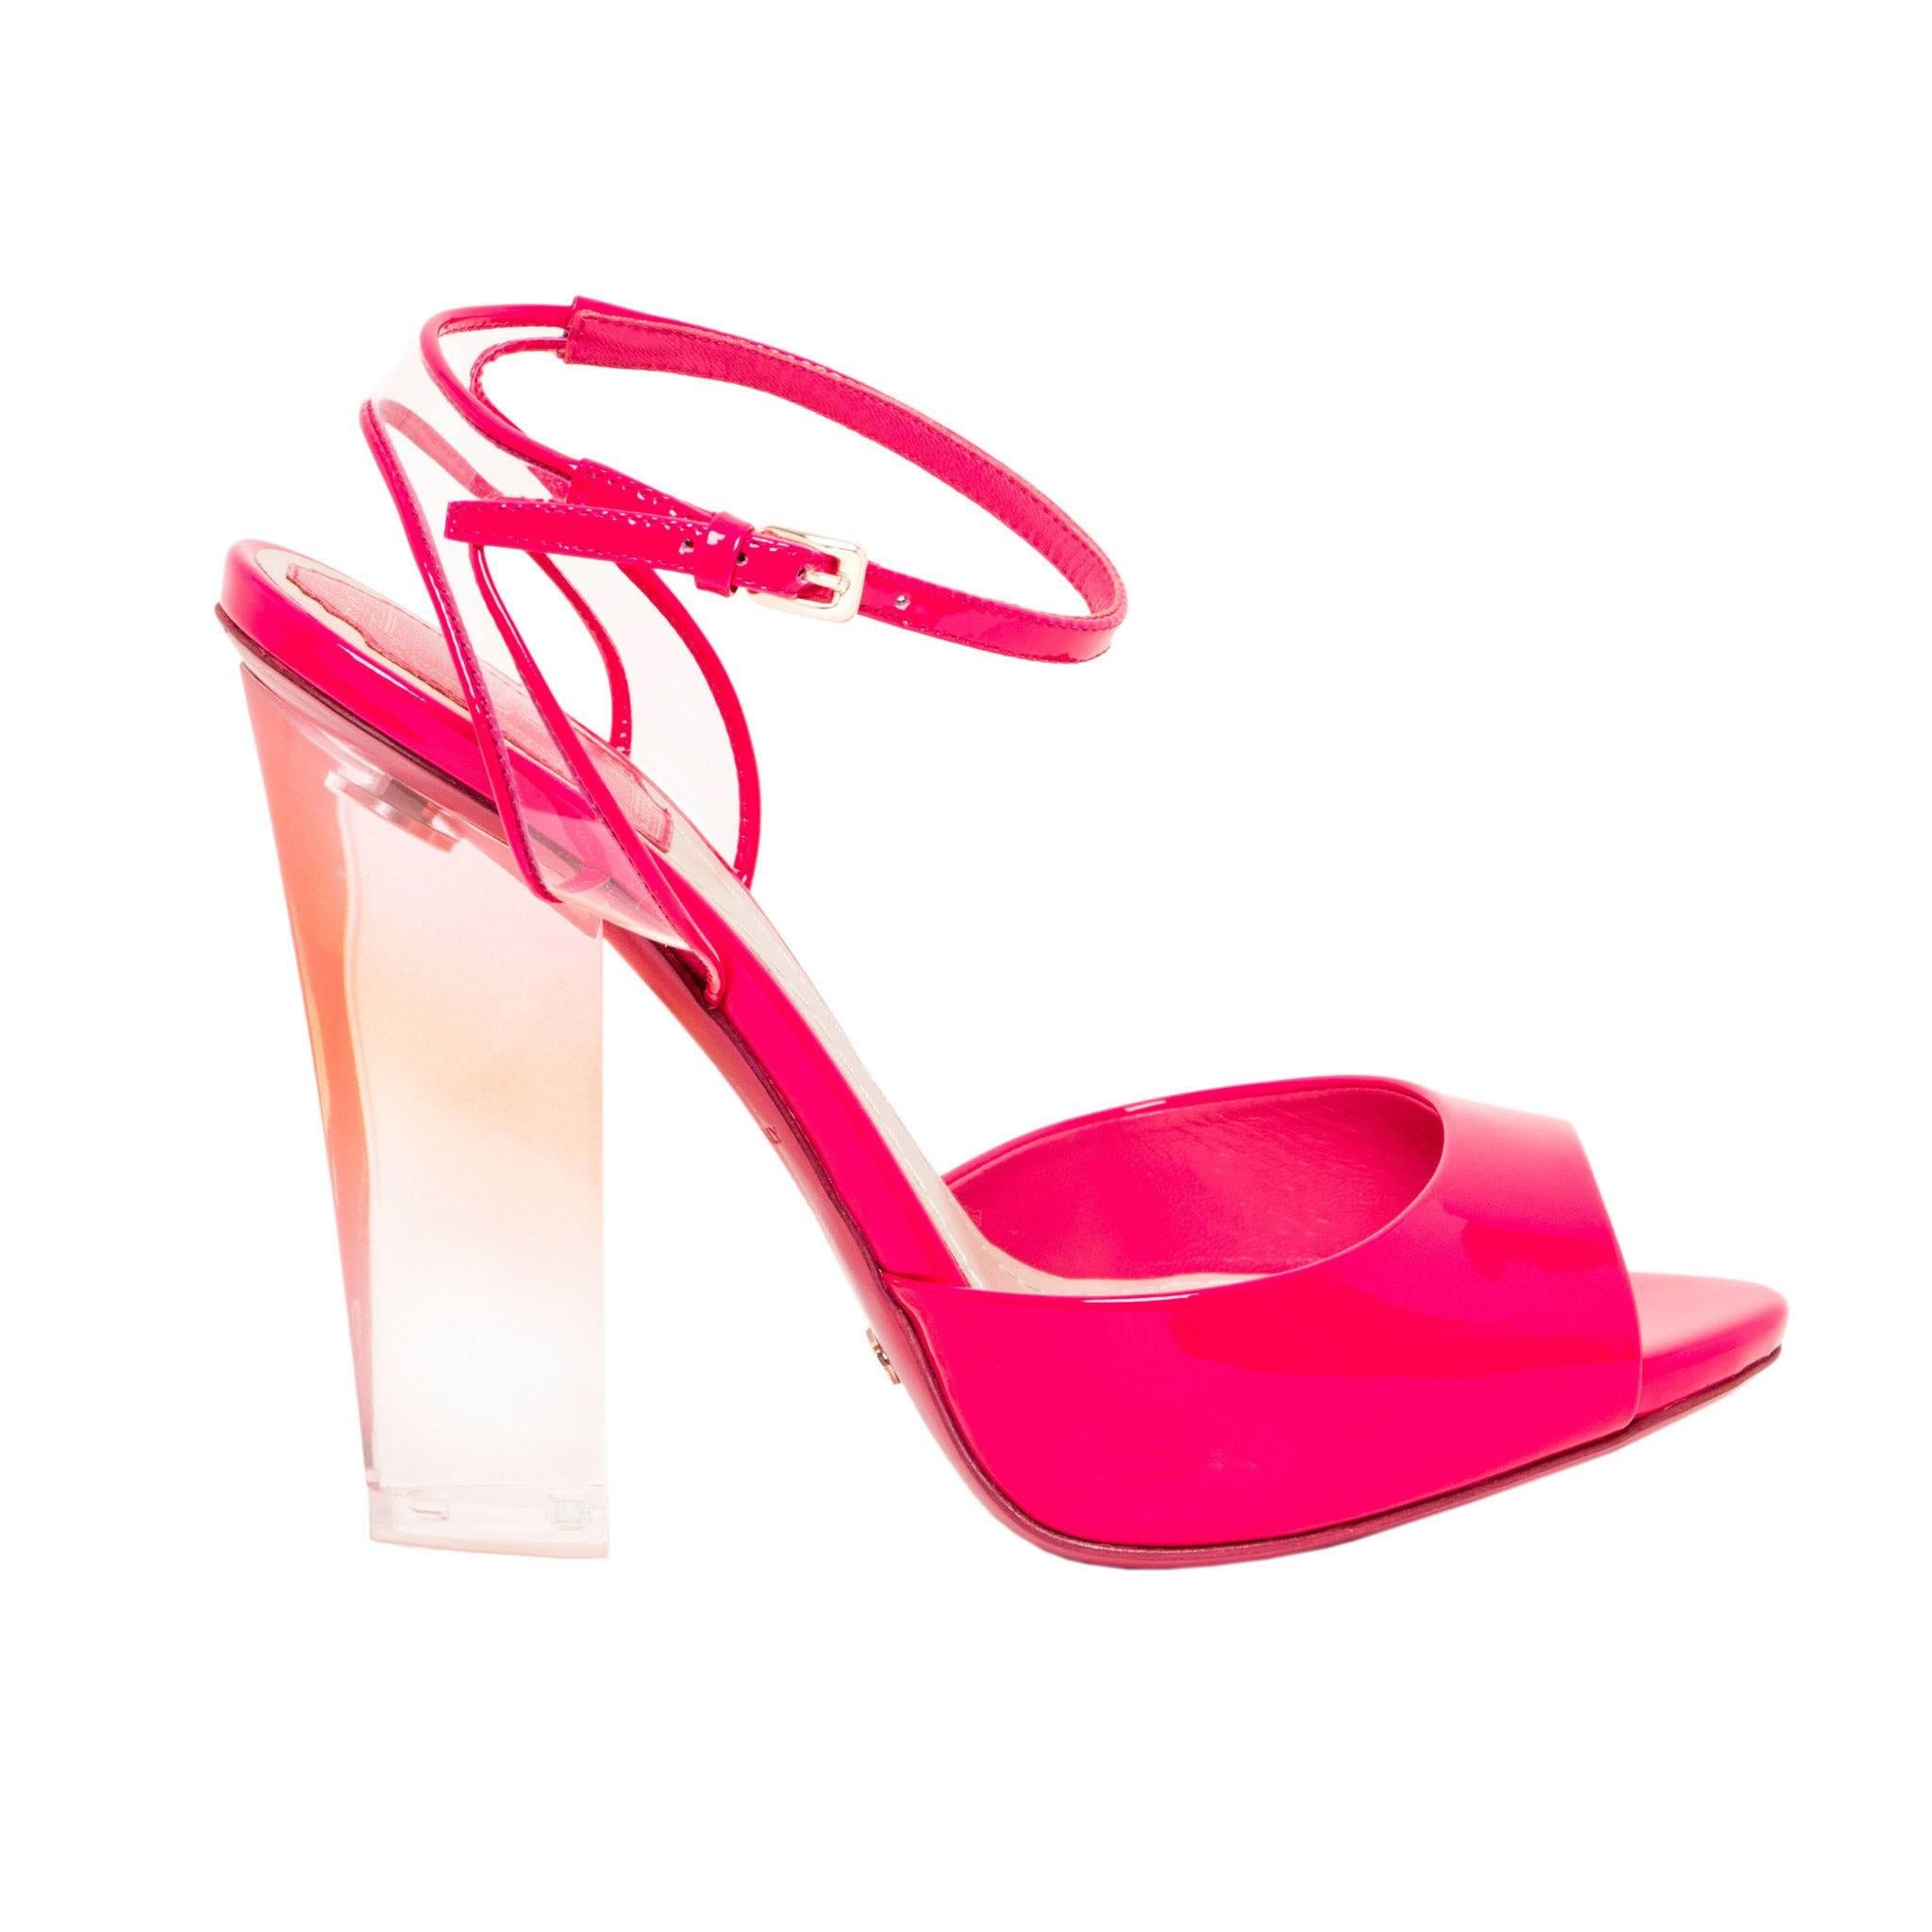 CURATOR'S NOTES

Fierce and fabulous, these block heel NEW Christian Dior sandals are sure to make an impression! The moderate heel height makes them wearable and versatile for dressy and casual looks. 

Includes original Christian Dior dust